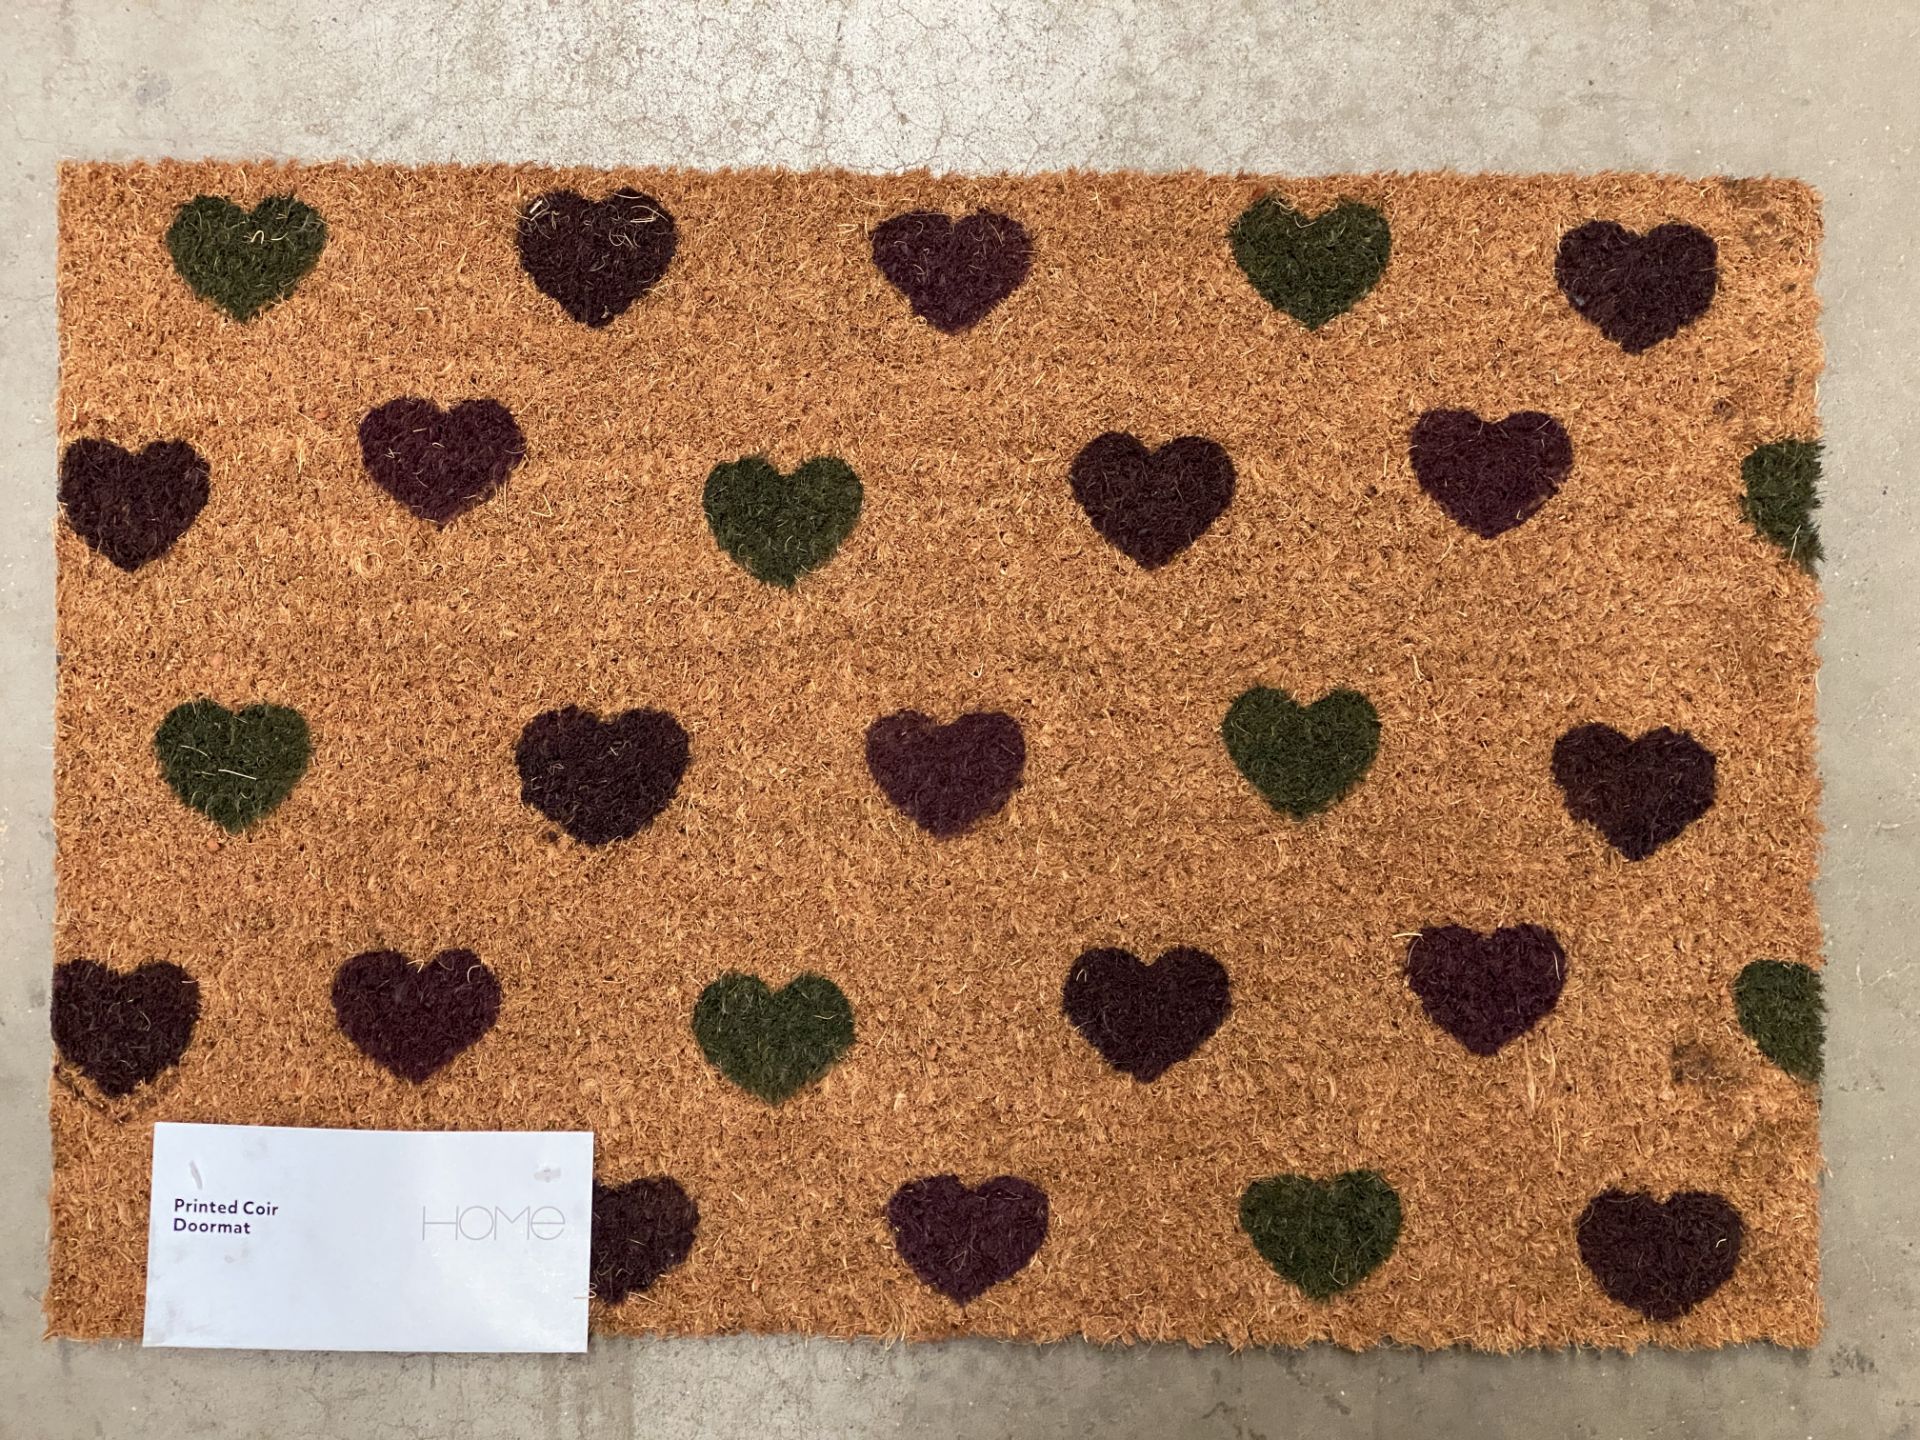 30 x Sainsburys Home Multi Hearts Stencilled Coir Doormats - 40cm x 60cm - (10 sealed outer packs